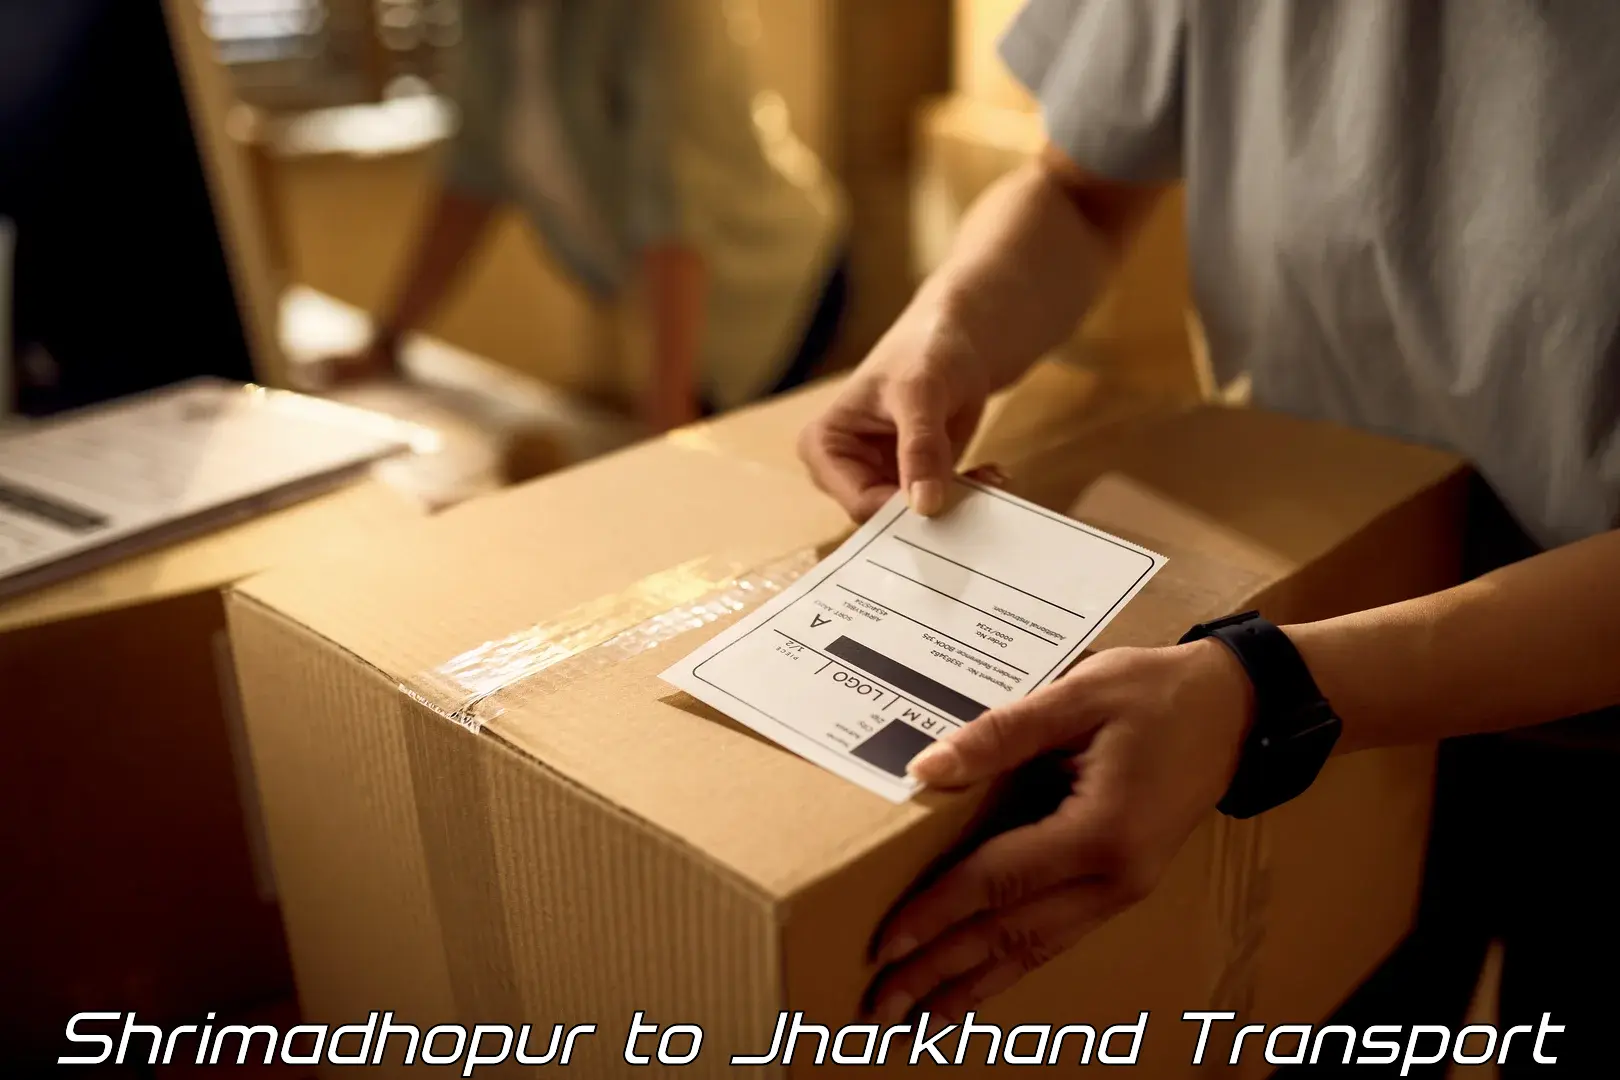 Transport in sharing Shrimadhopur to Jharkhand